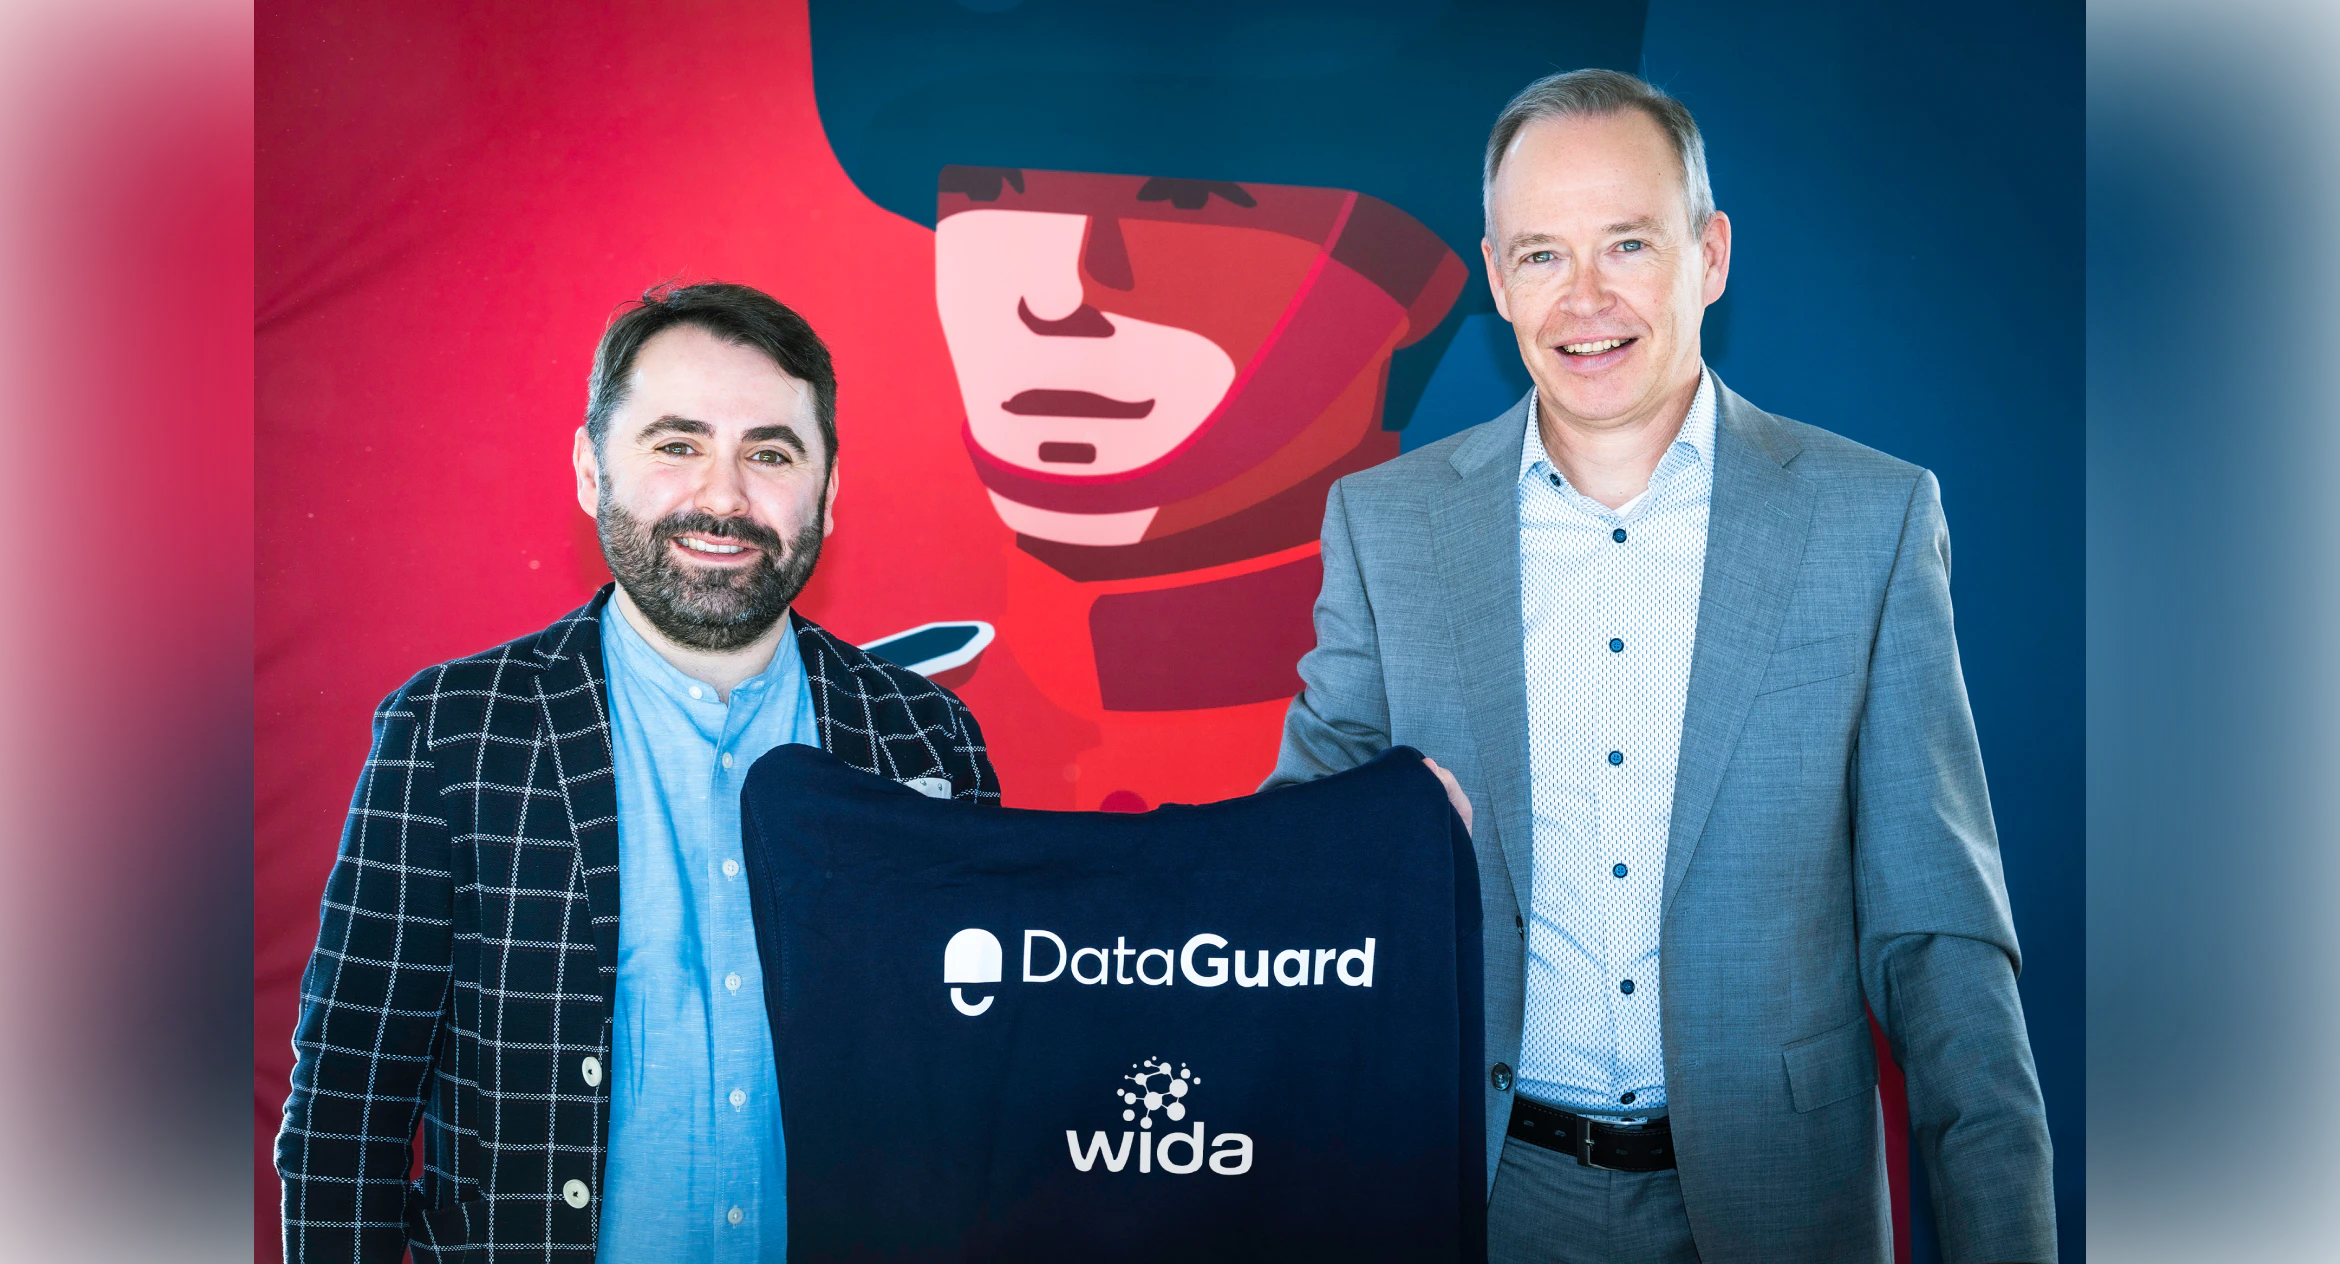 DataGuard joins forces with Germany’s former state data protection commissioner, and foremost privacy expert, Dr. Stefan Brink